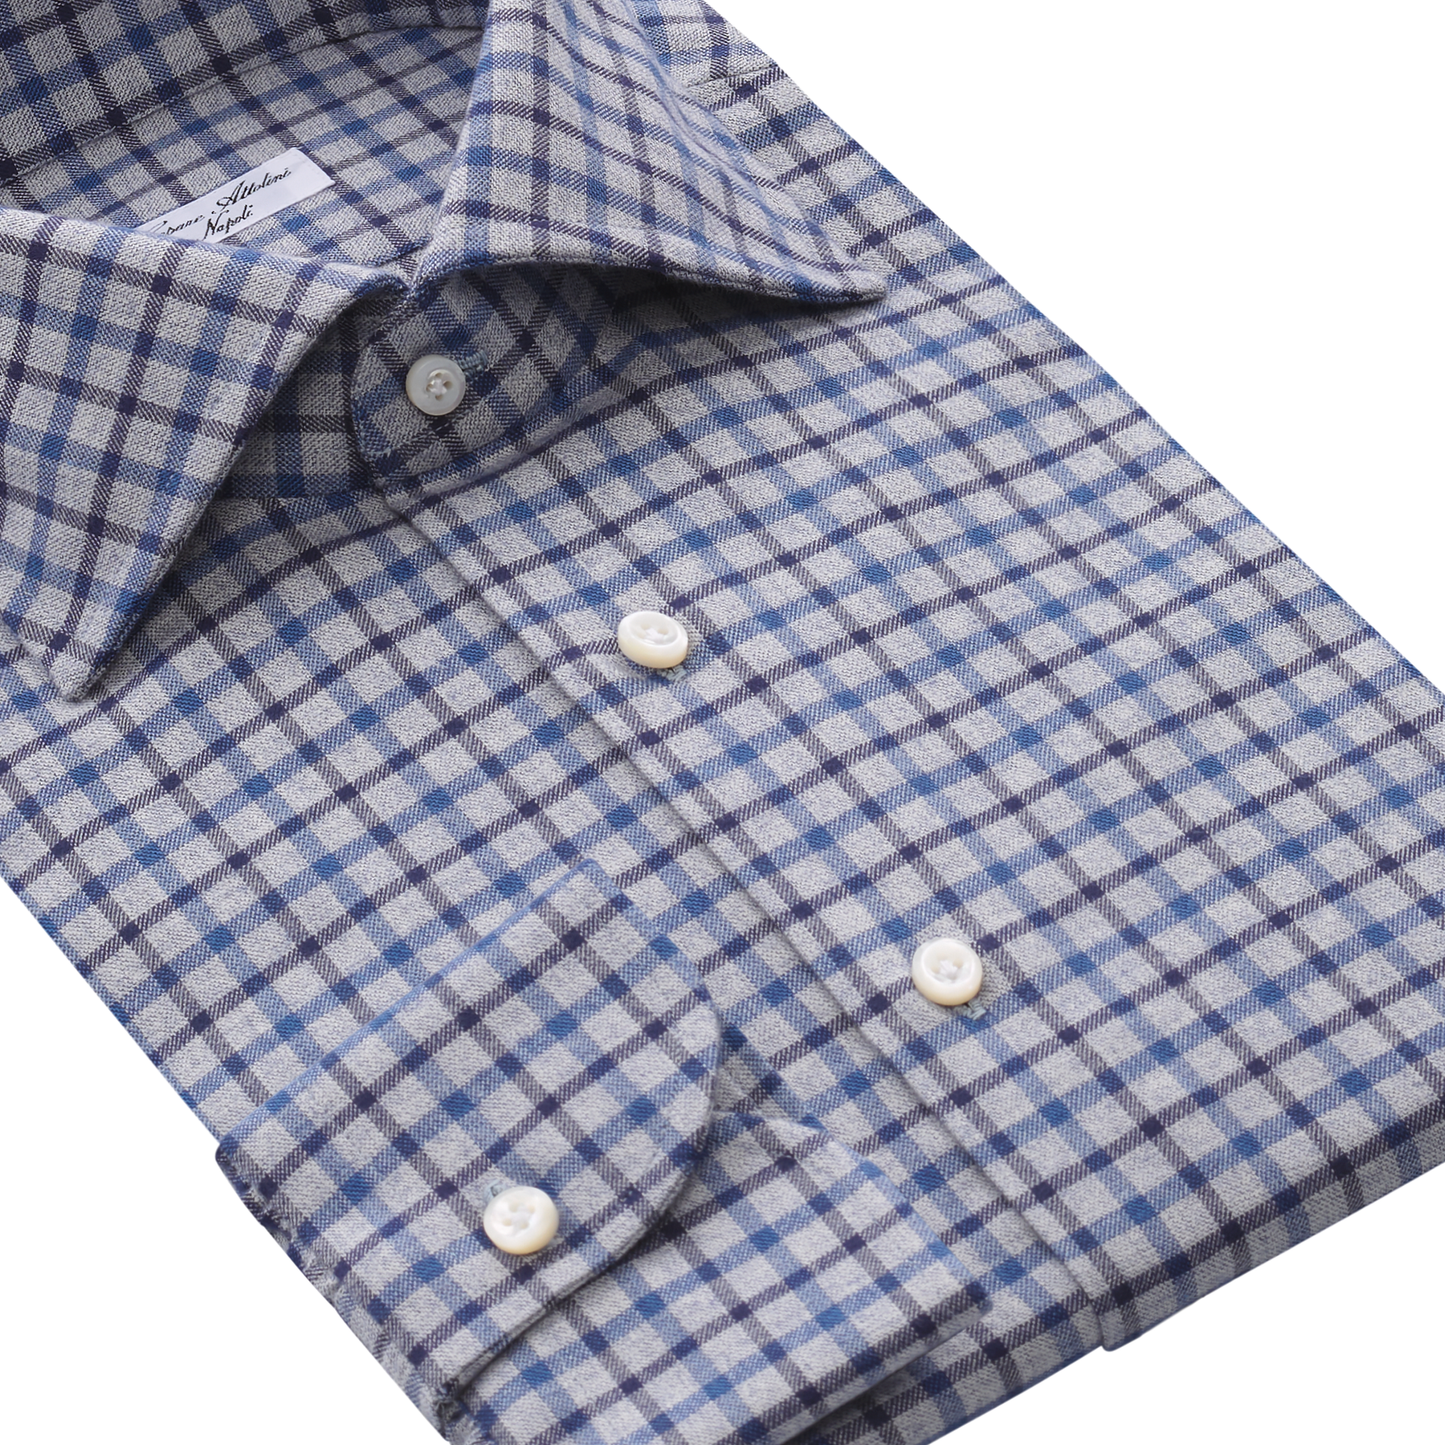 Checked Cotton Shirt in Blue